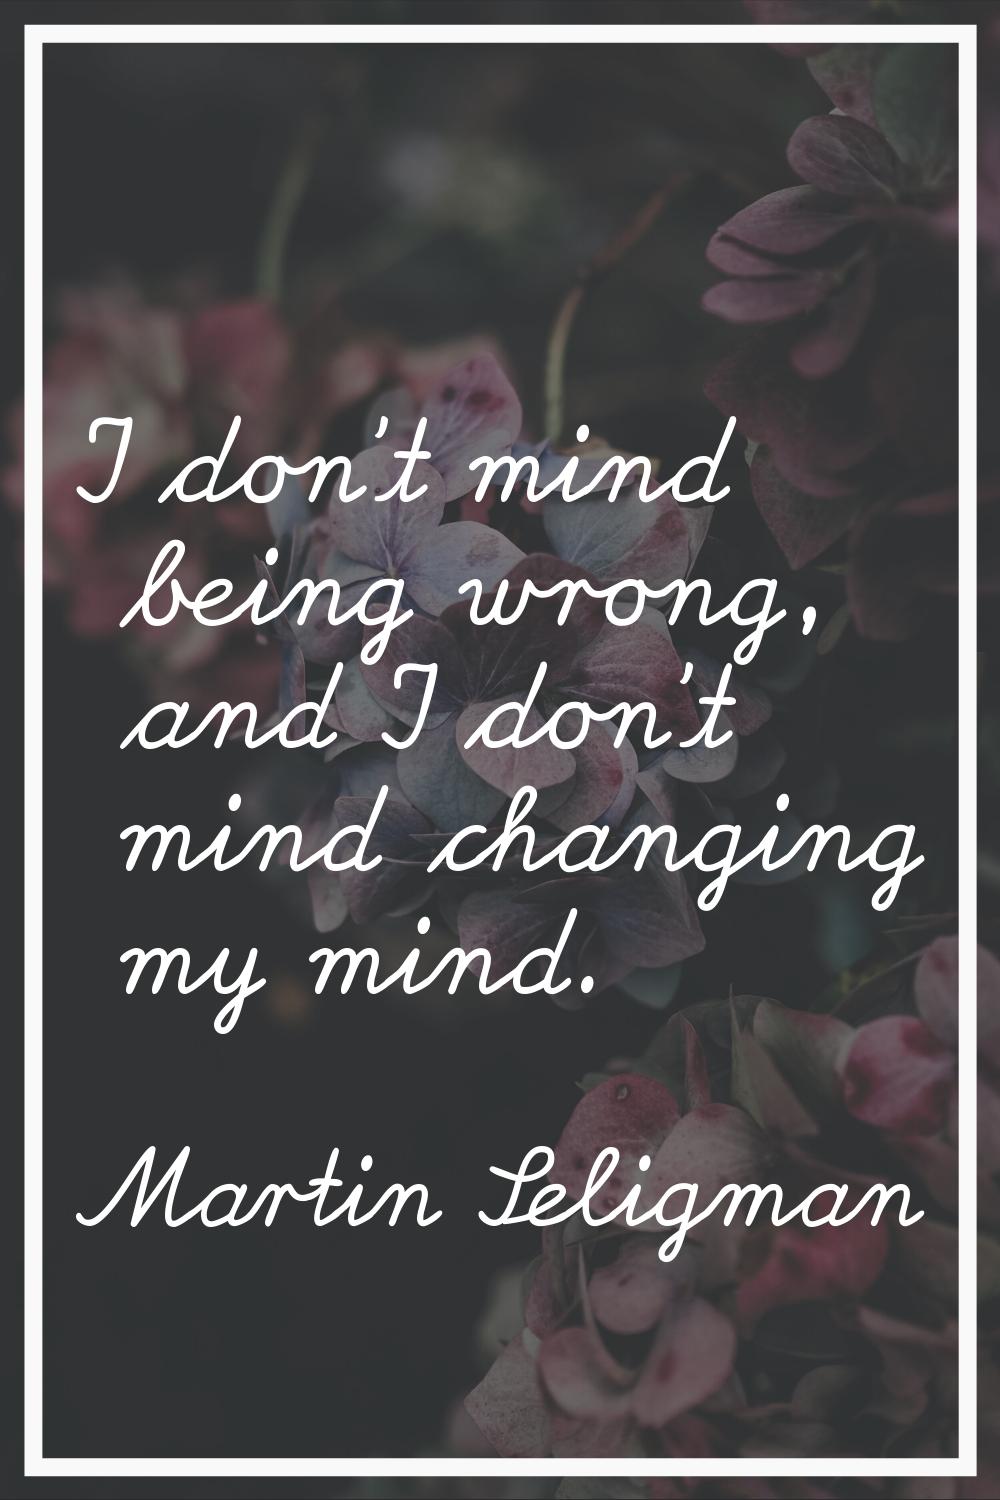 I don't mind being wrong, and I don't mind changing my mind.